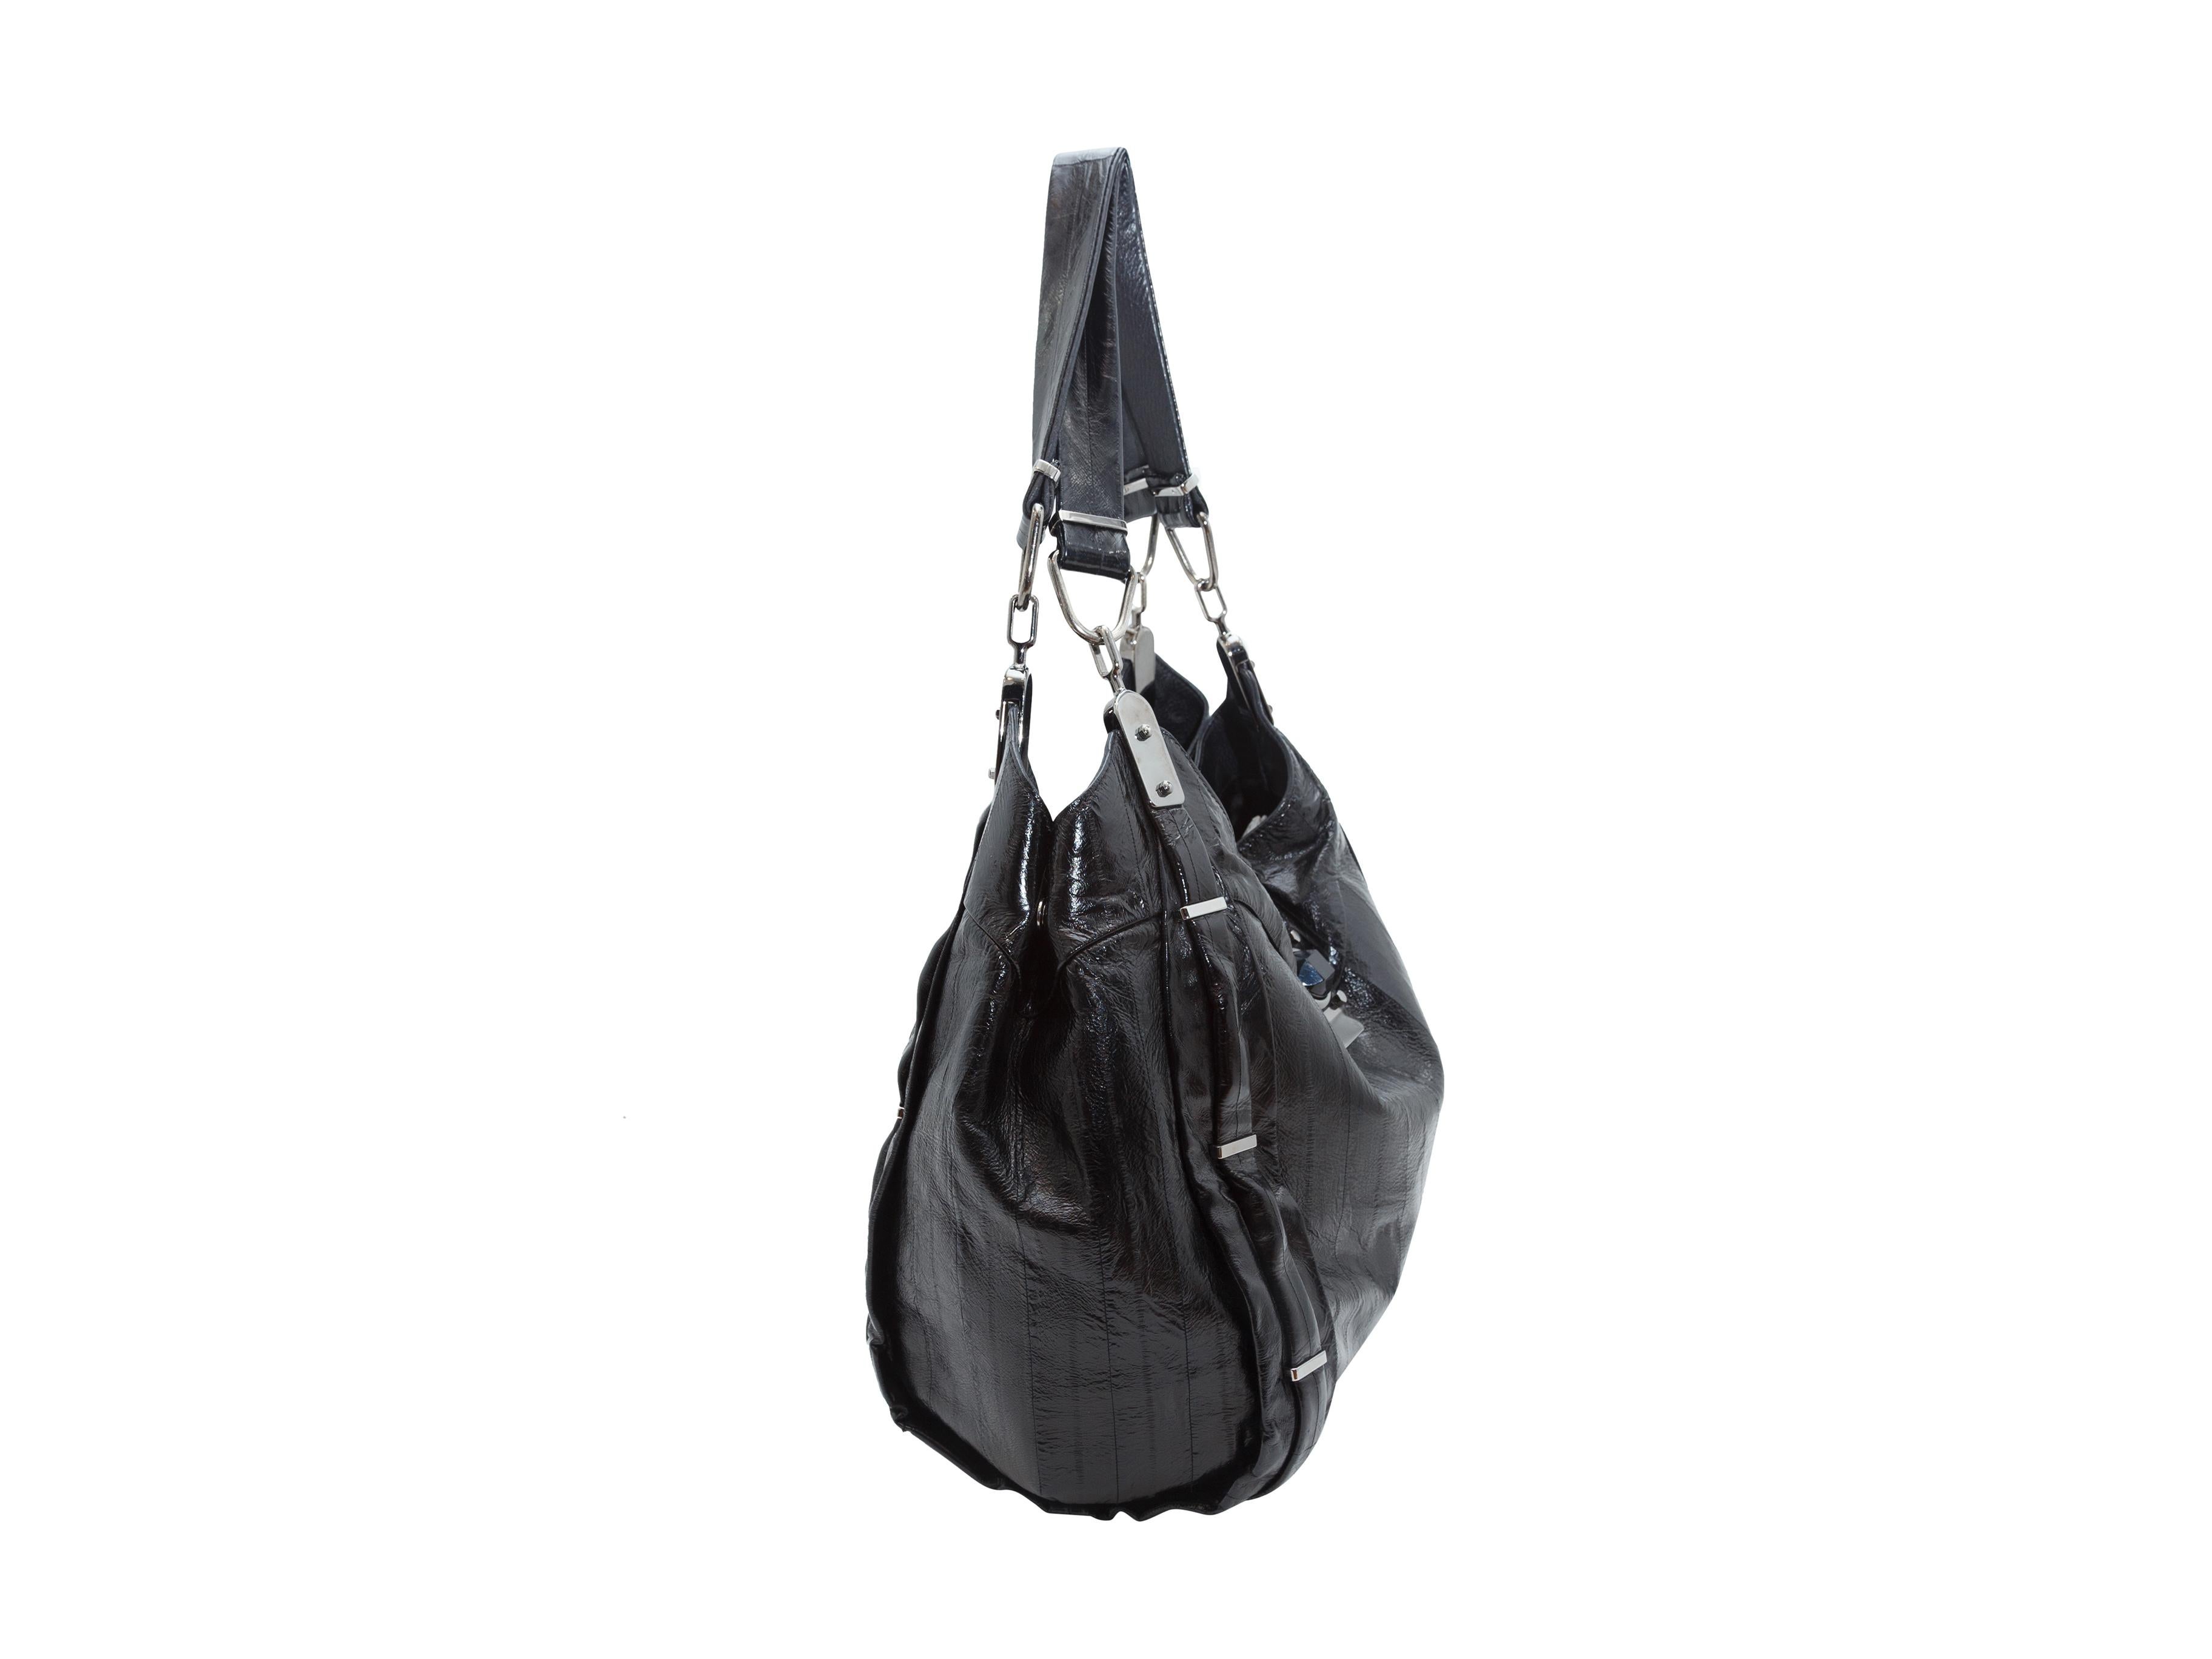 Product details: Black Celine Eelskin Shoulder Bag.  Buttery soft eelskin makes up the body of this Celine shoulder bag. It has flat eelskin straps, silver tone hardware, and a zippered interior compartment. 12